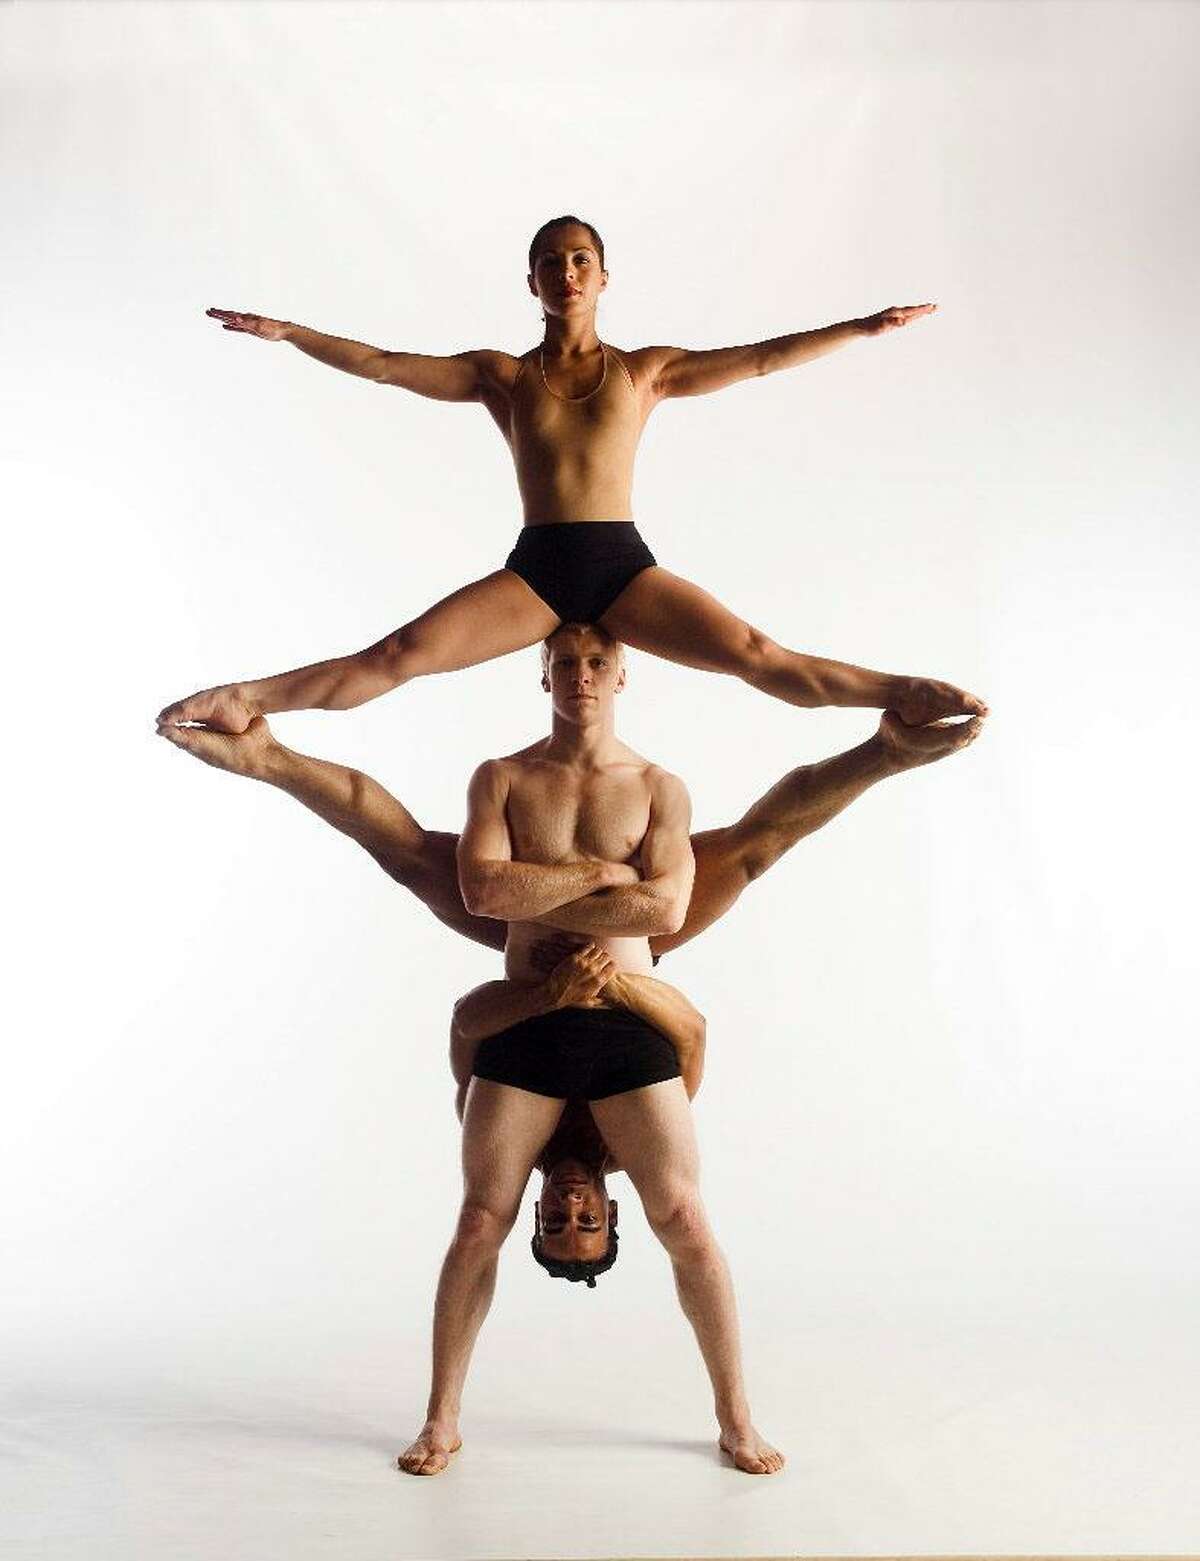 The Connecticut-based modern dance troupe Pilobolus is performing Come to Your Senses at Jacob’s Pillow in Becket, MA, this weekend. Performances begin Wednesday night.